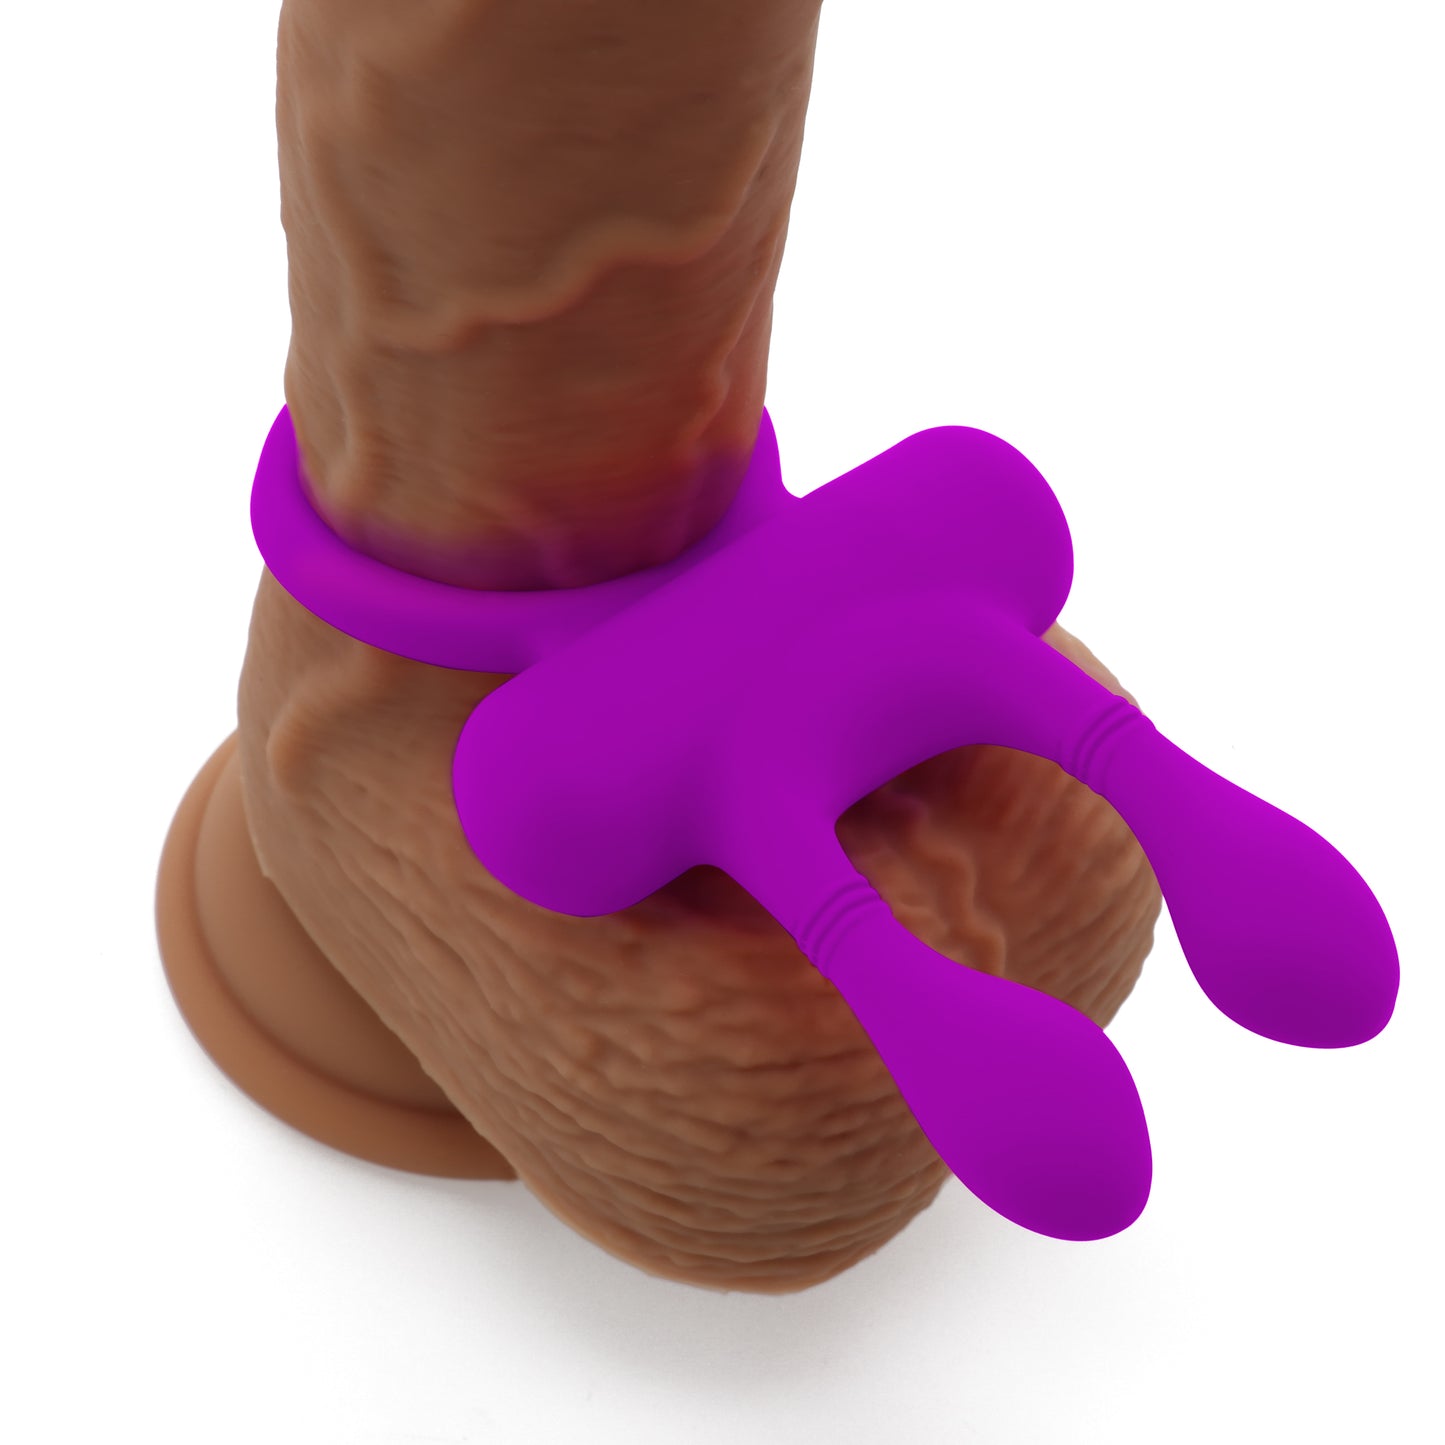 Vibrating Cock Ring with Clit Tickler - My Little Pet